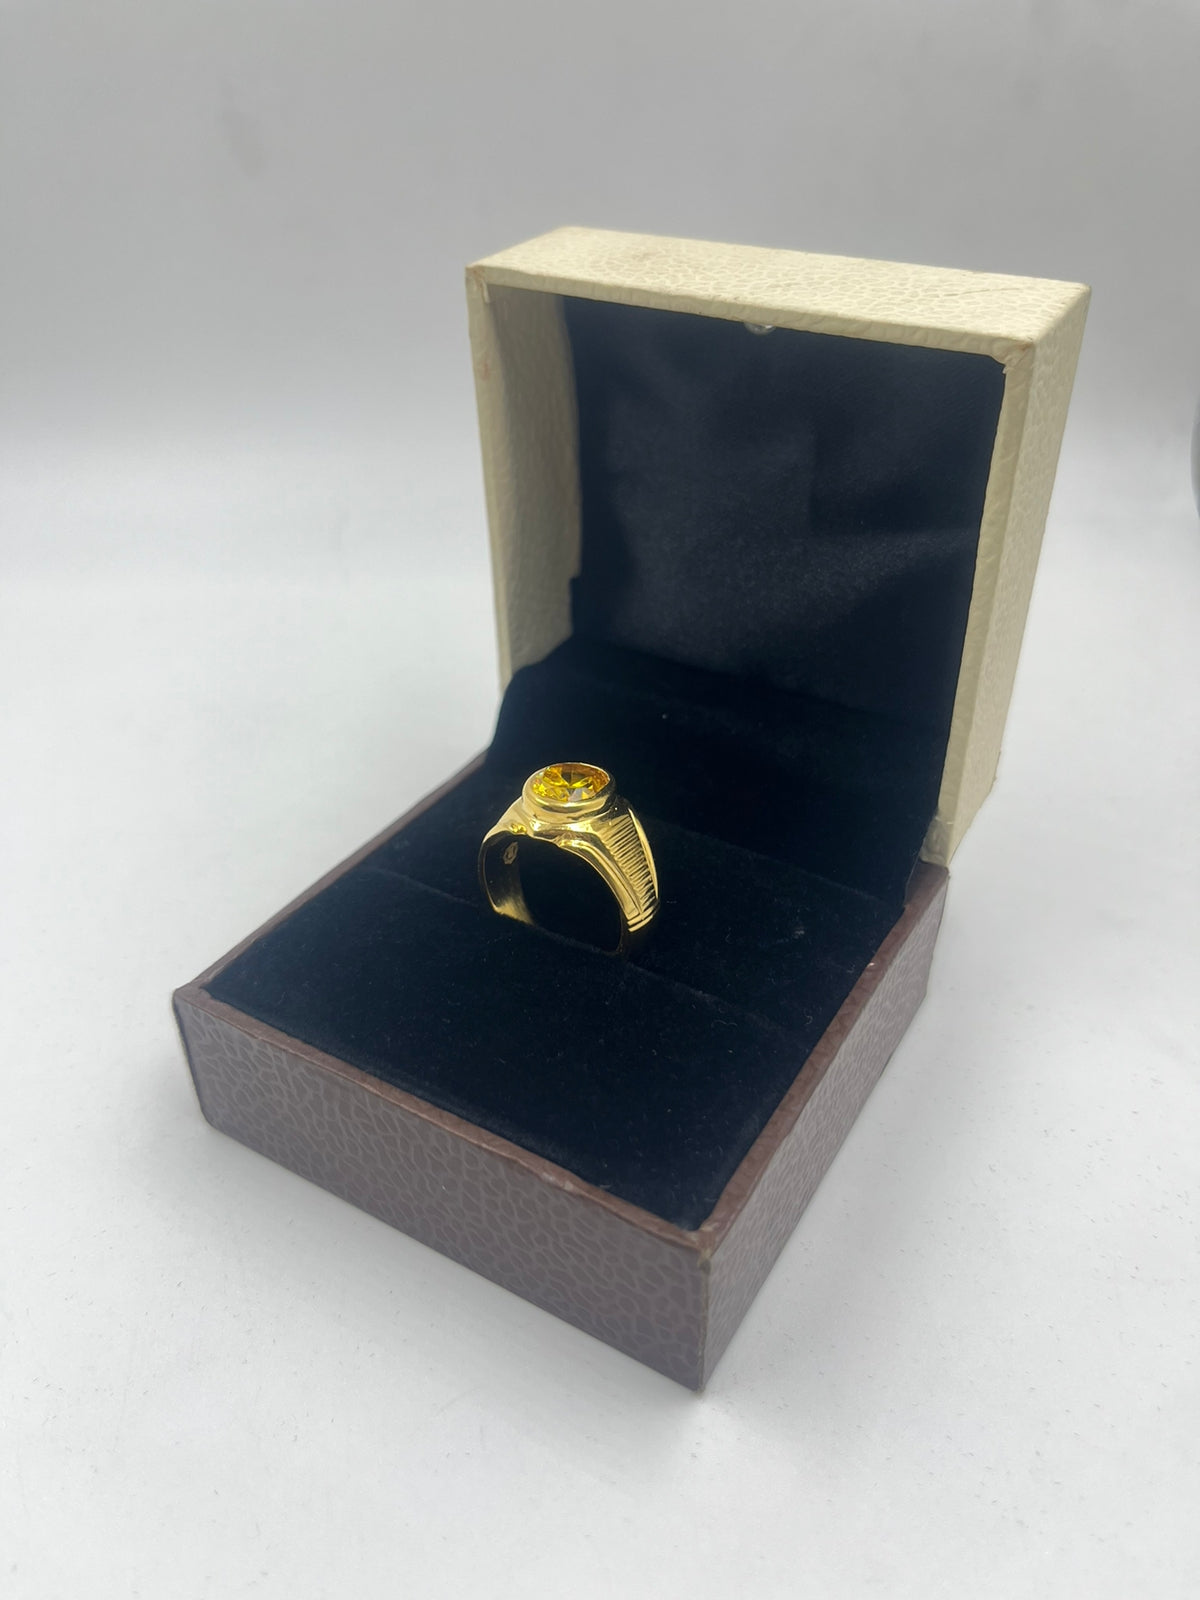 Flea Market Gold! Nothing special, 2.5 g 10k ring for $10. But it made me  happy enough to share. Pleasant evening! : r/Gold